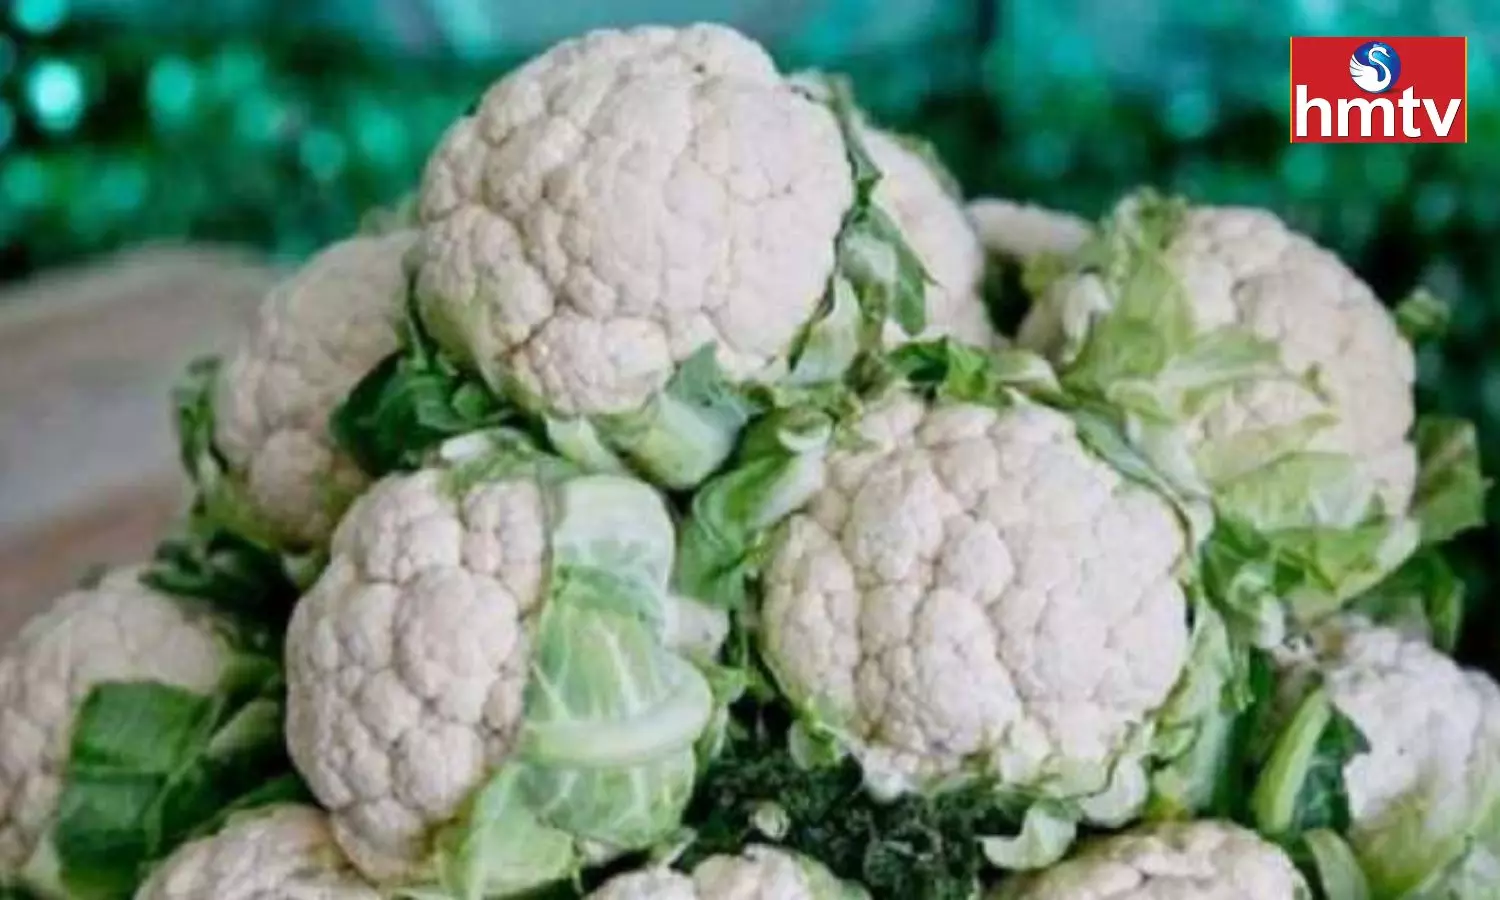 Even by Mistake These People Should not eat Cauliflower the Problem Will Increase